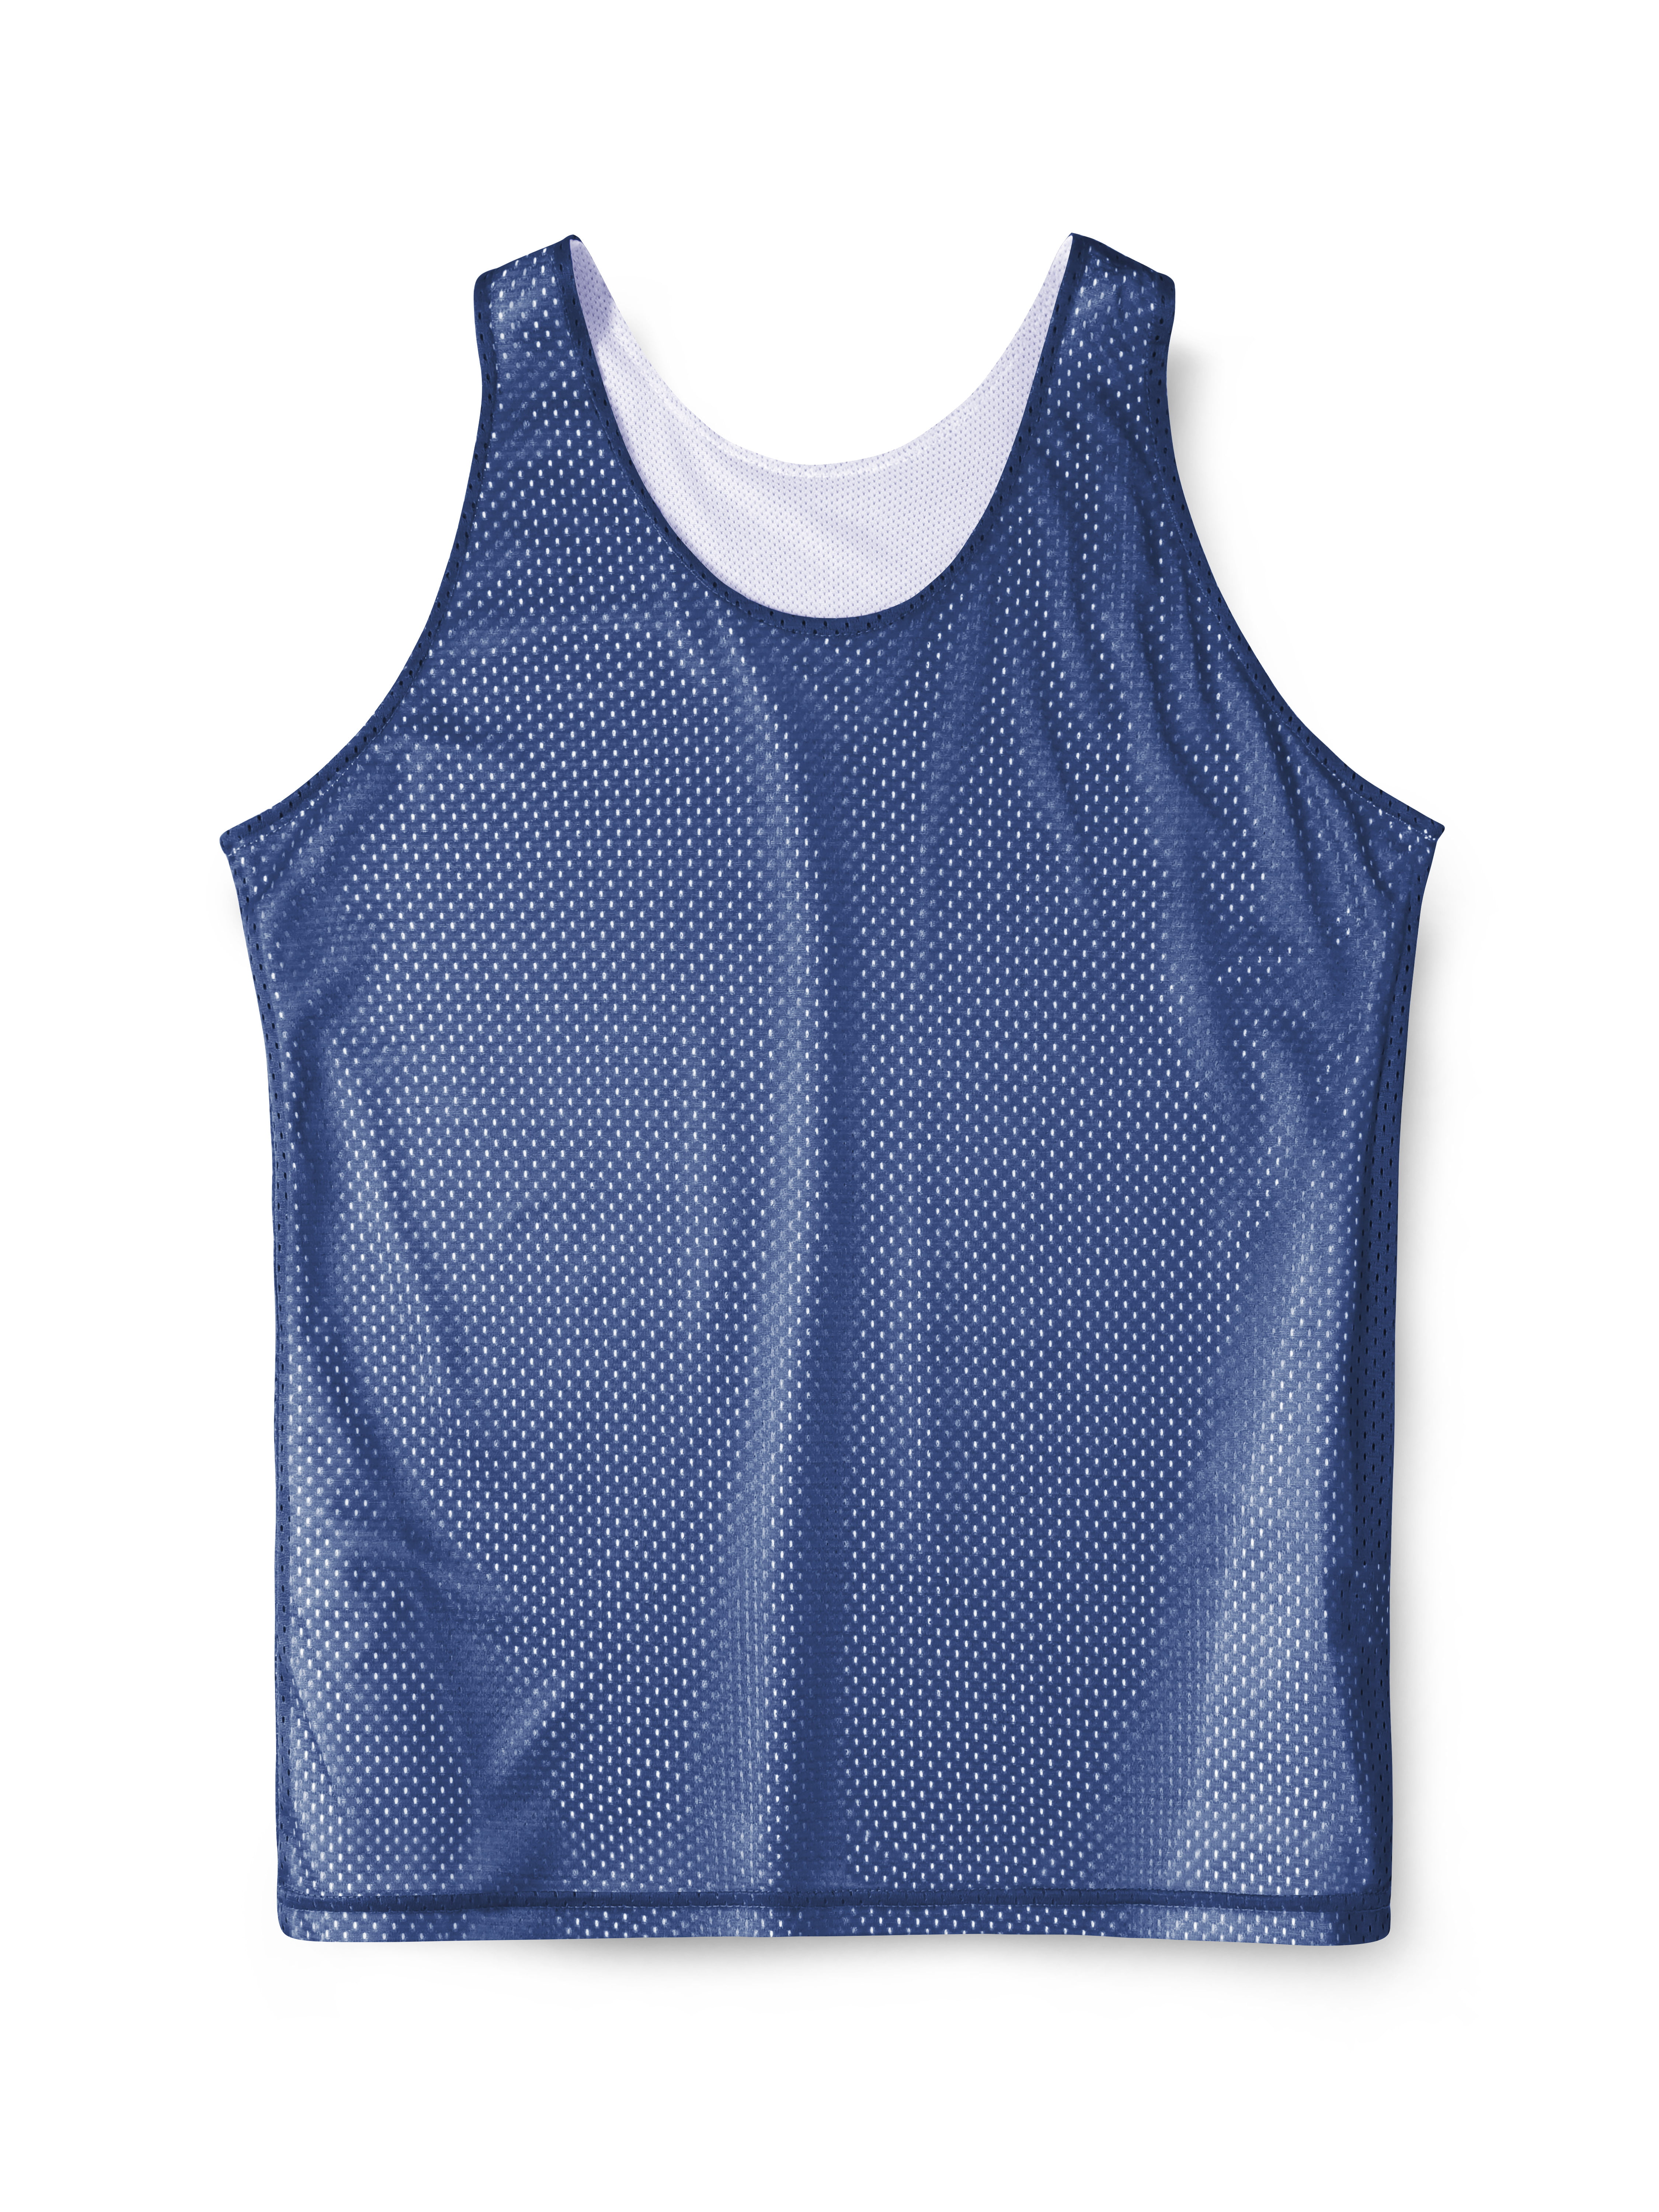 Game Gear AP993 Mens Tank Top Jersey-Uniform is Reversible to White-Great for Basketball 